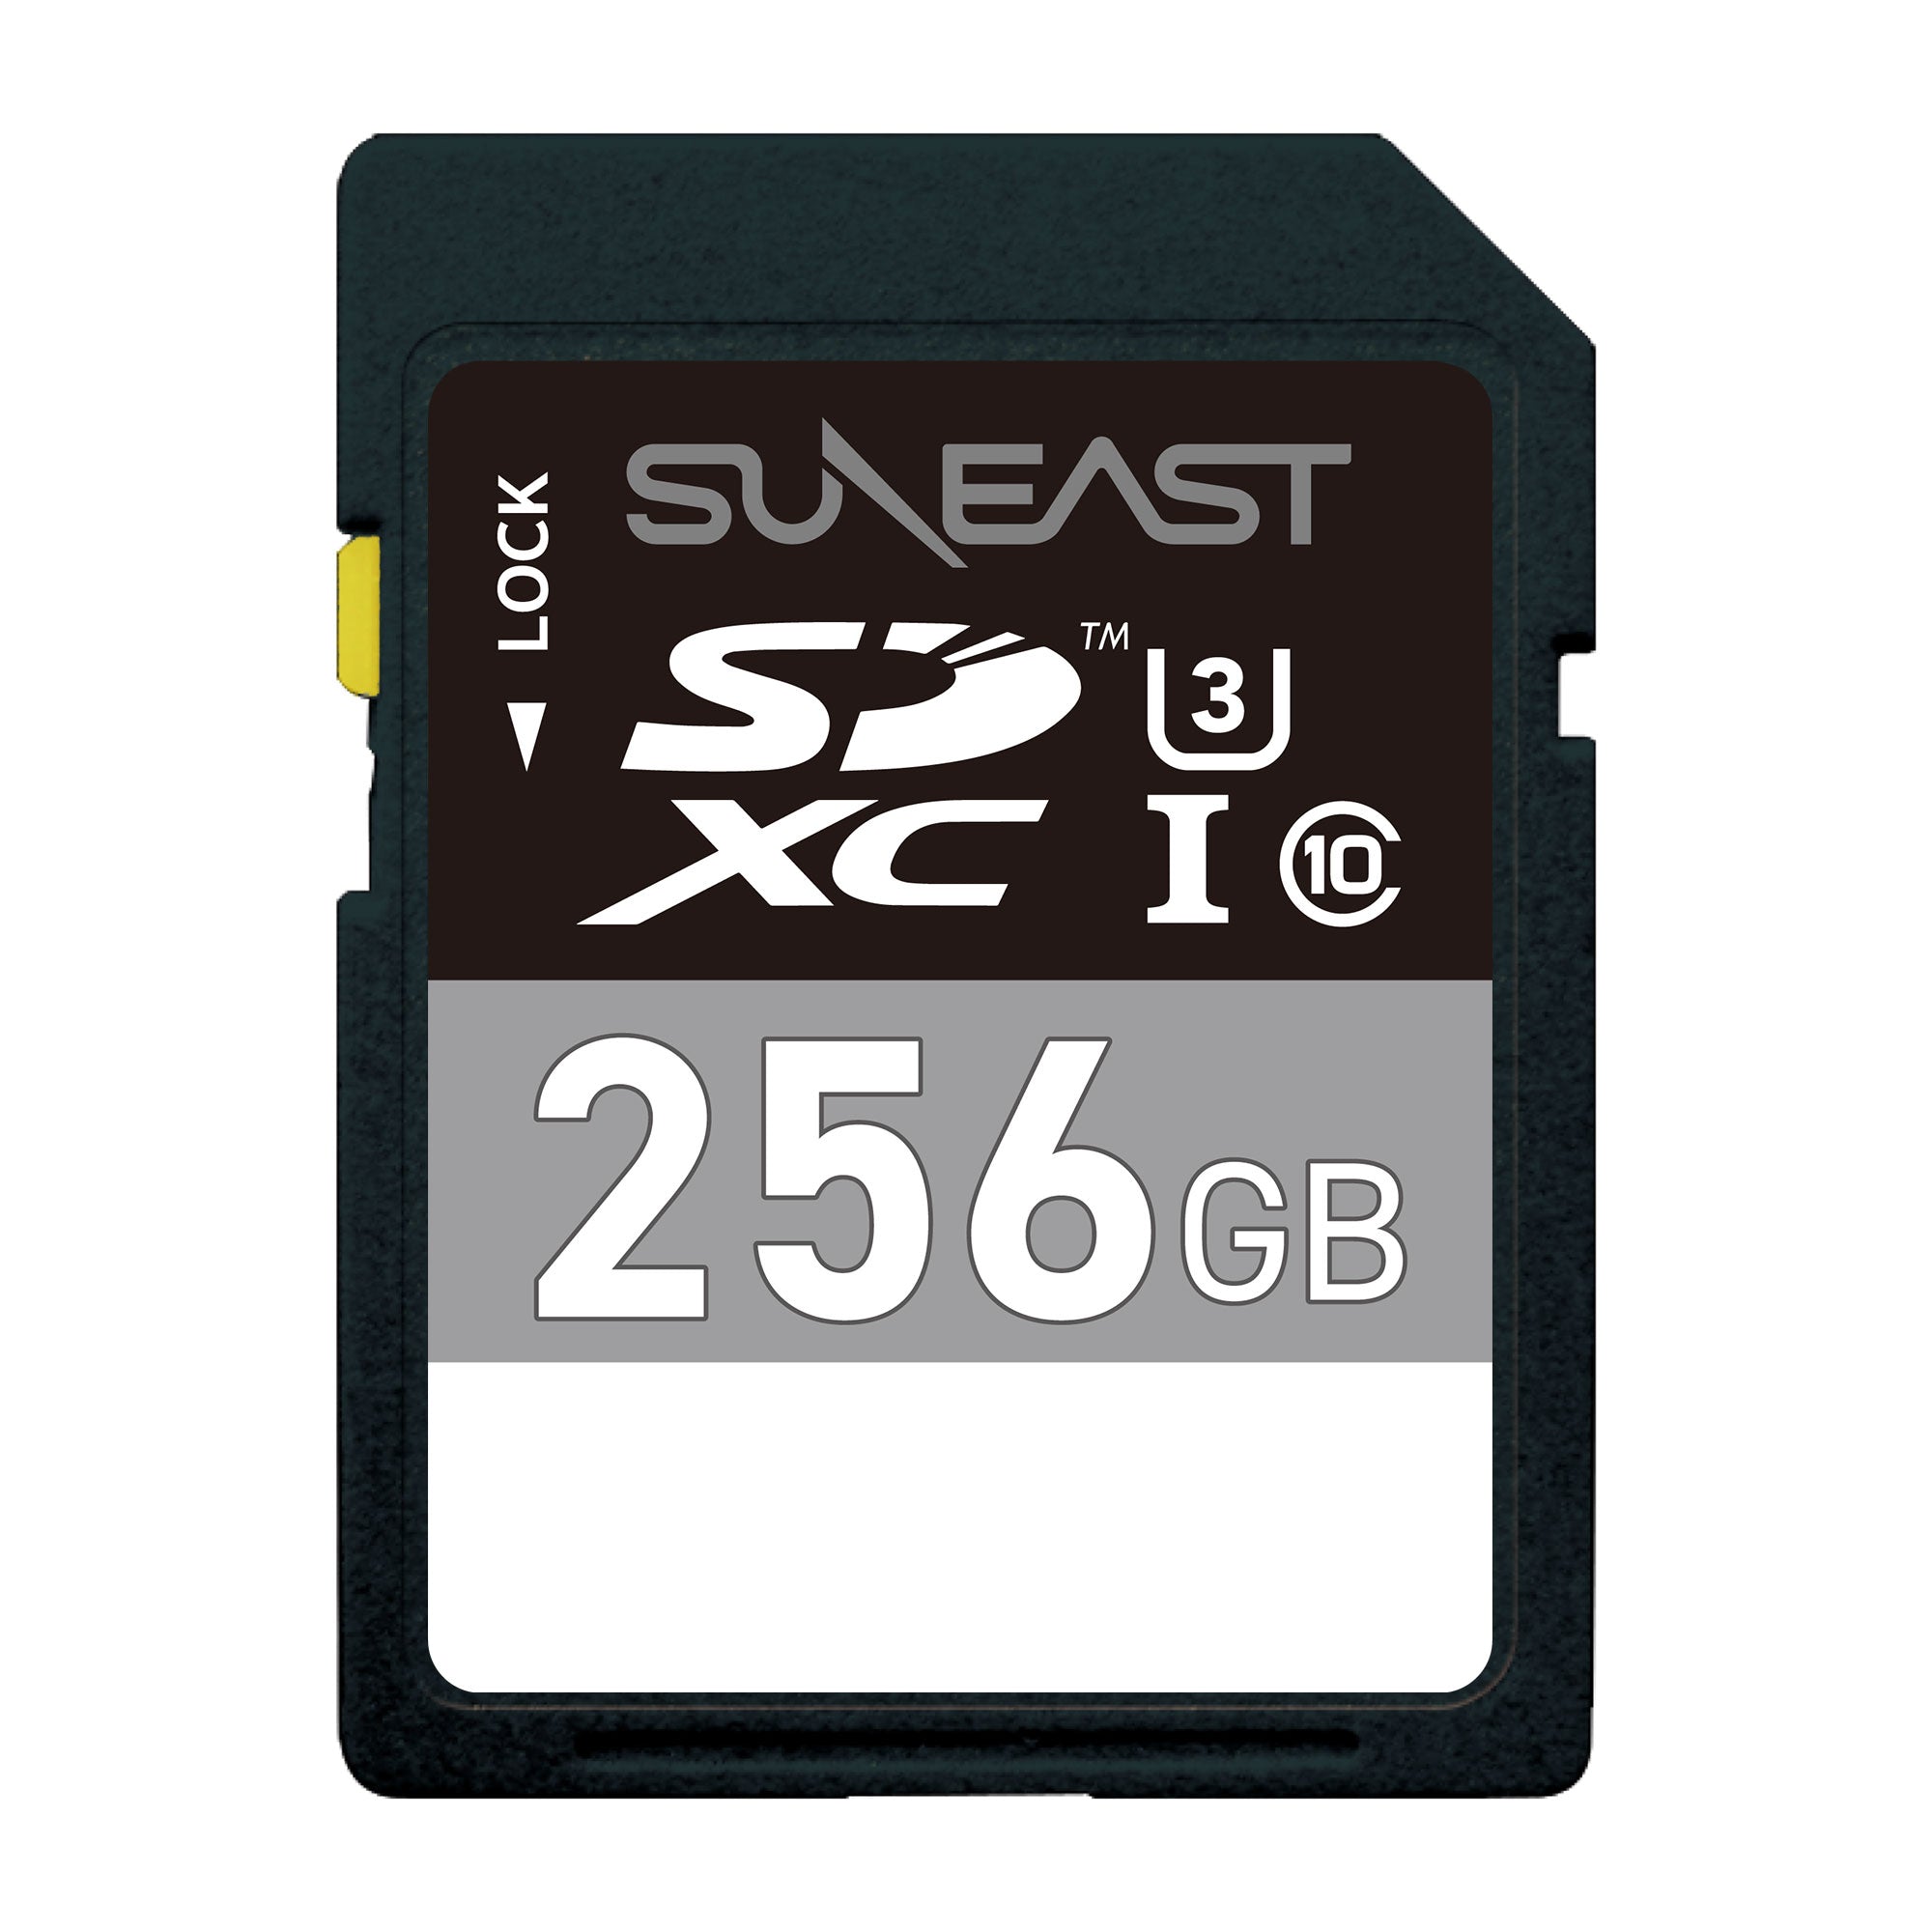 ULTRA PRO SDXC UHS-I Card 256GB - SUNEAST online store